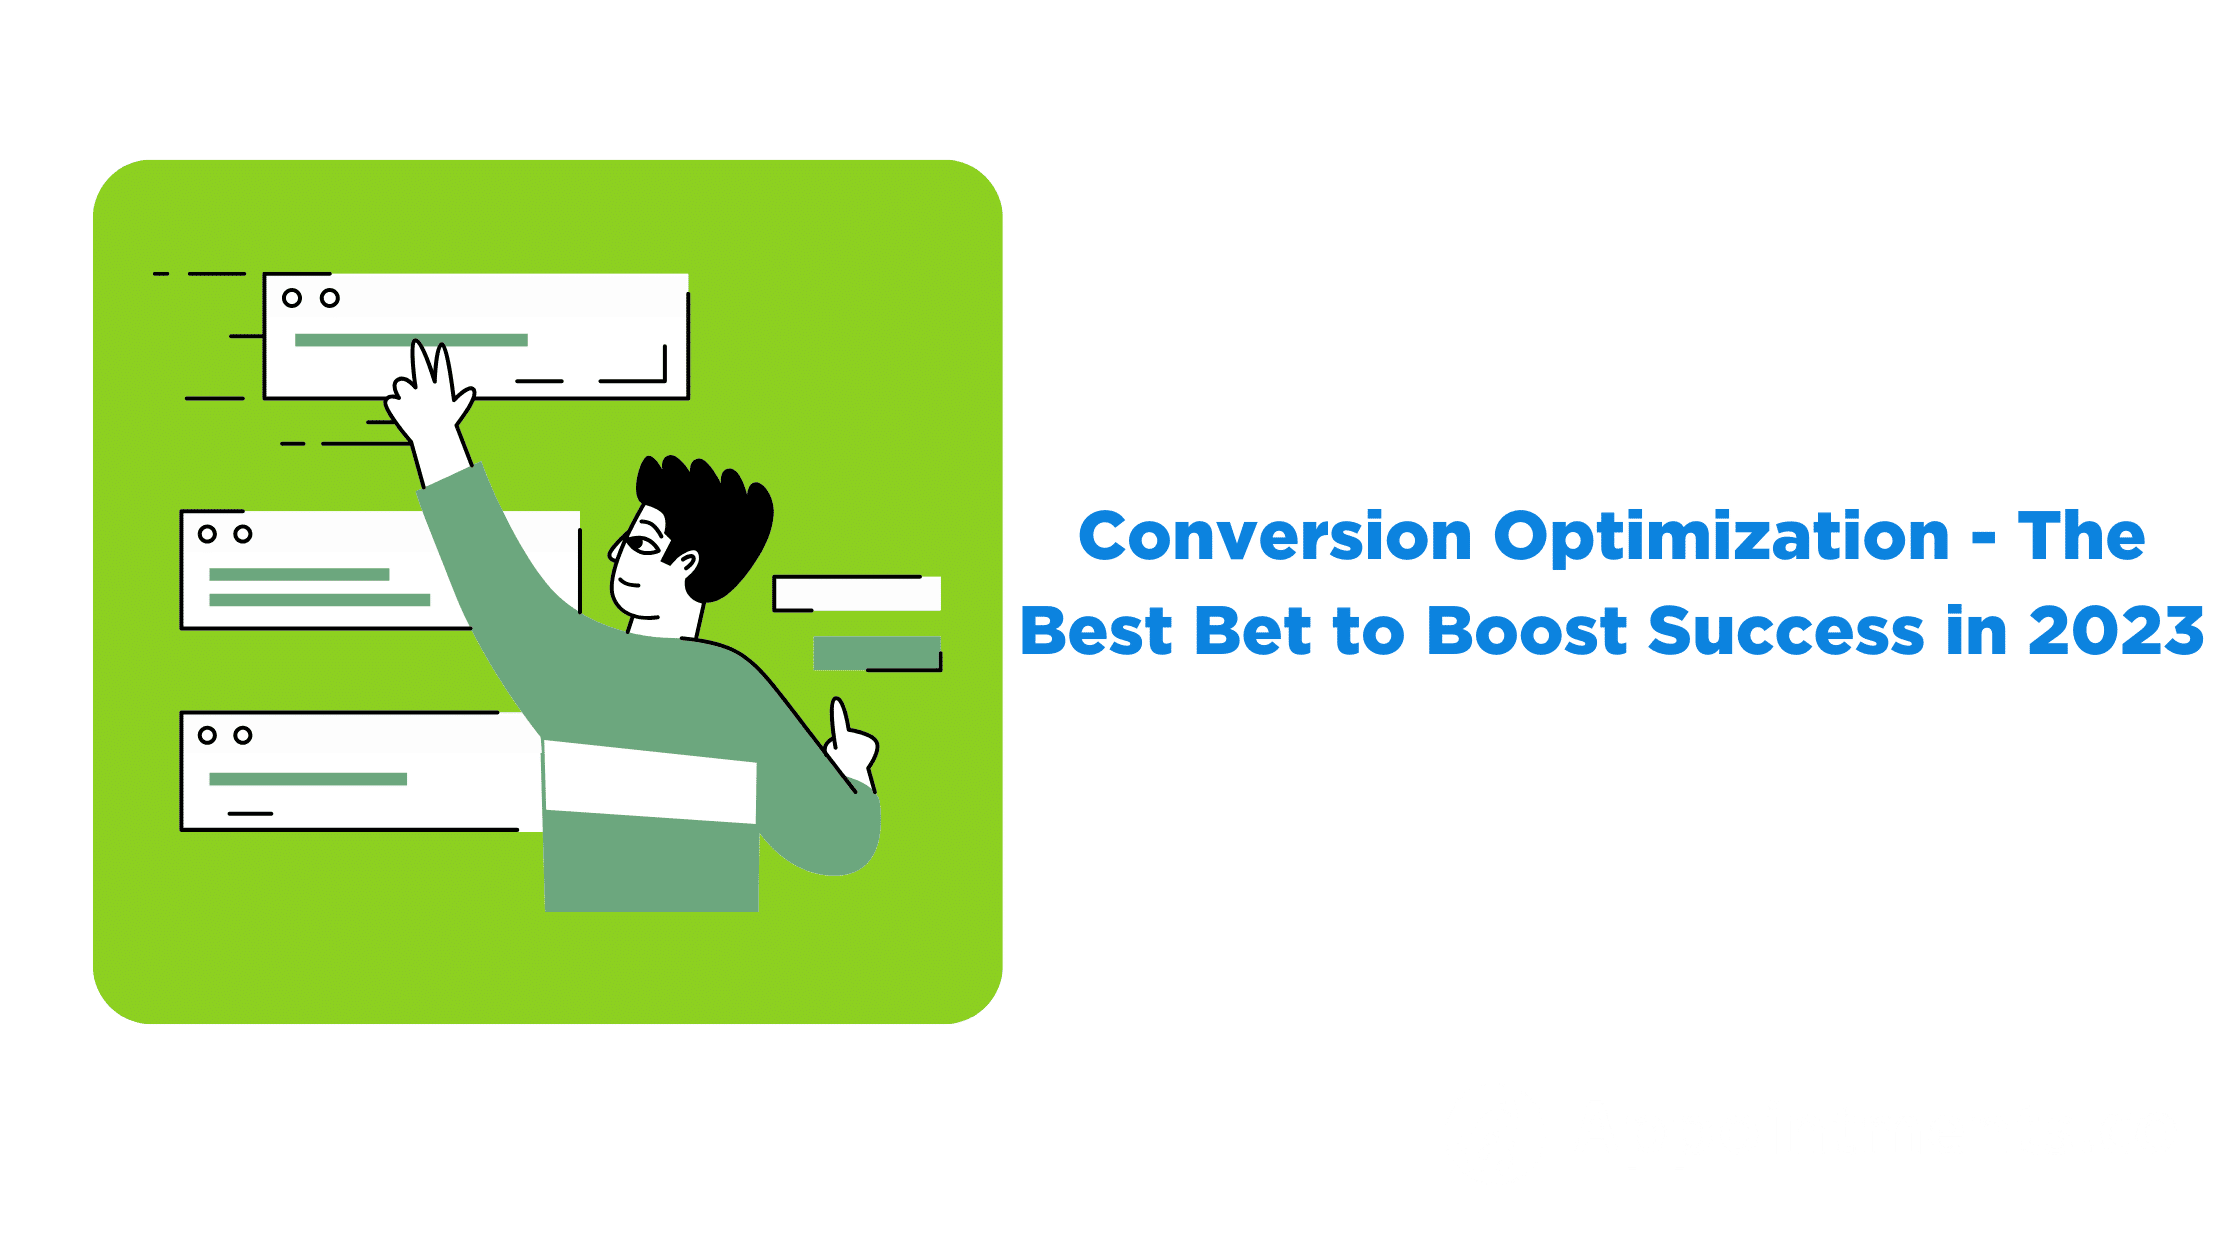 Conversion Optimization - The Best Bet to Boost Success in 2023